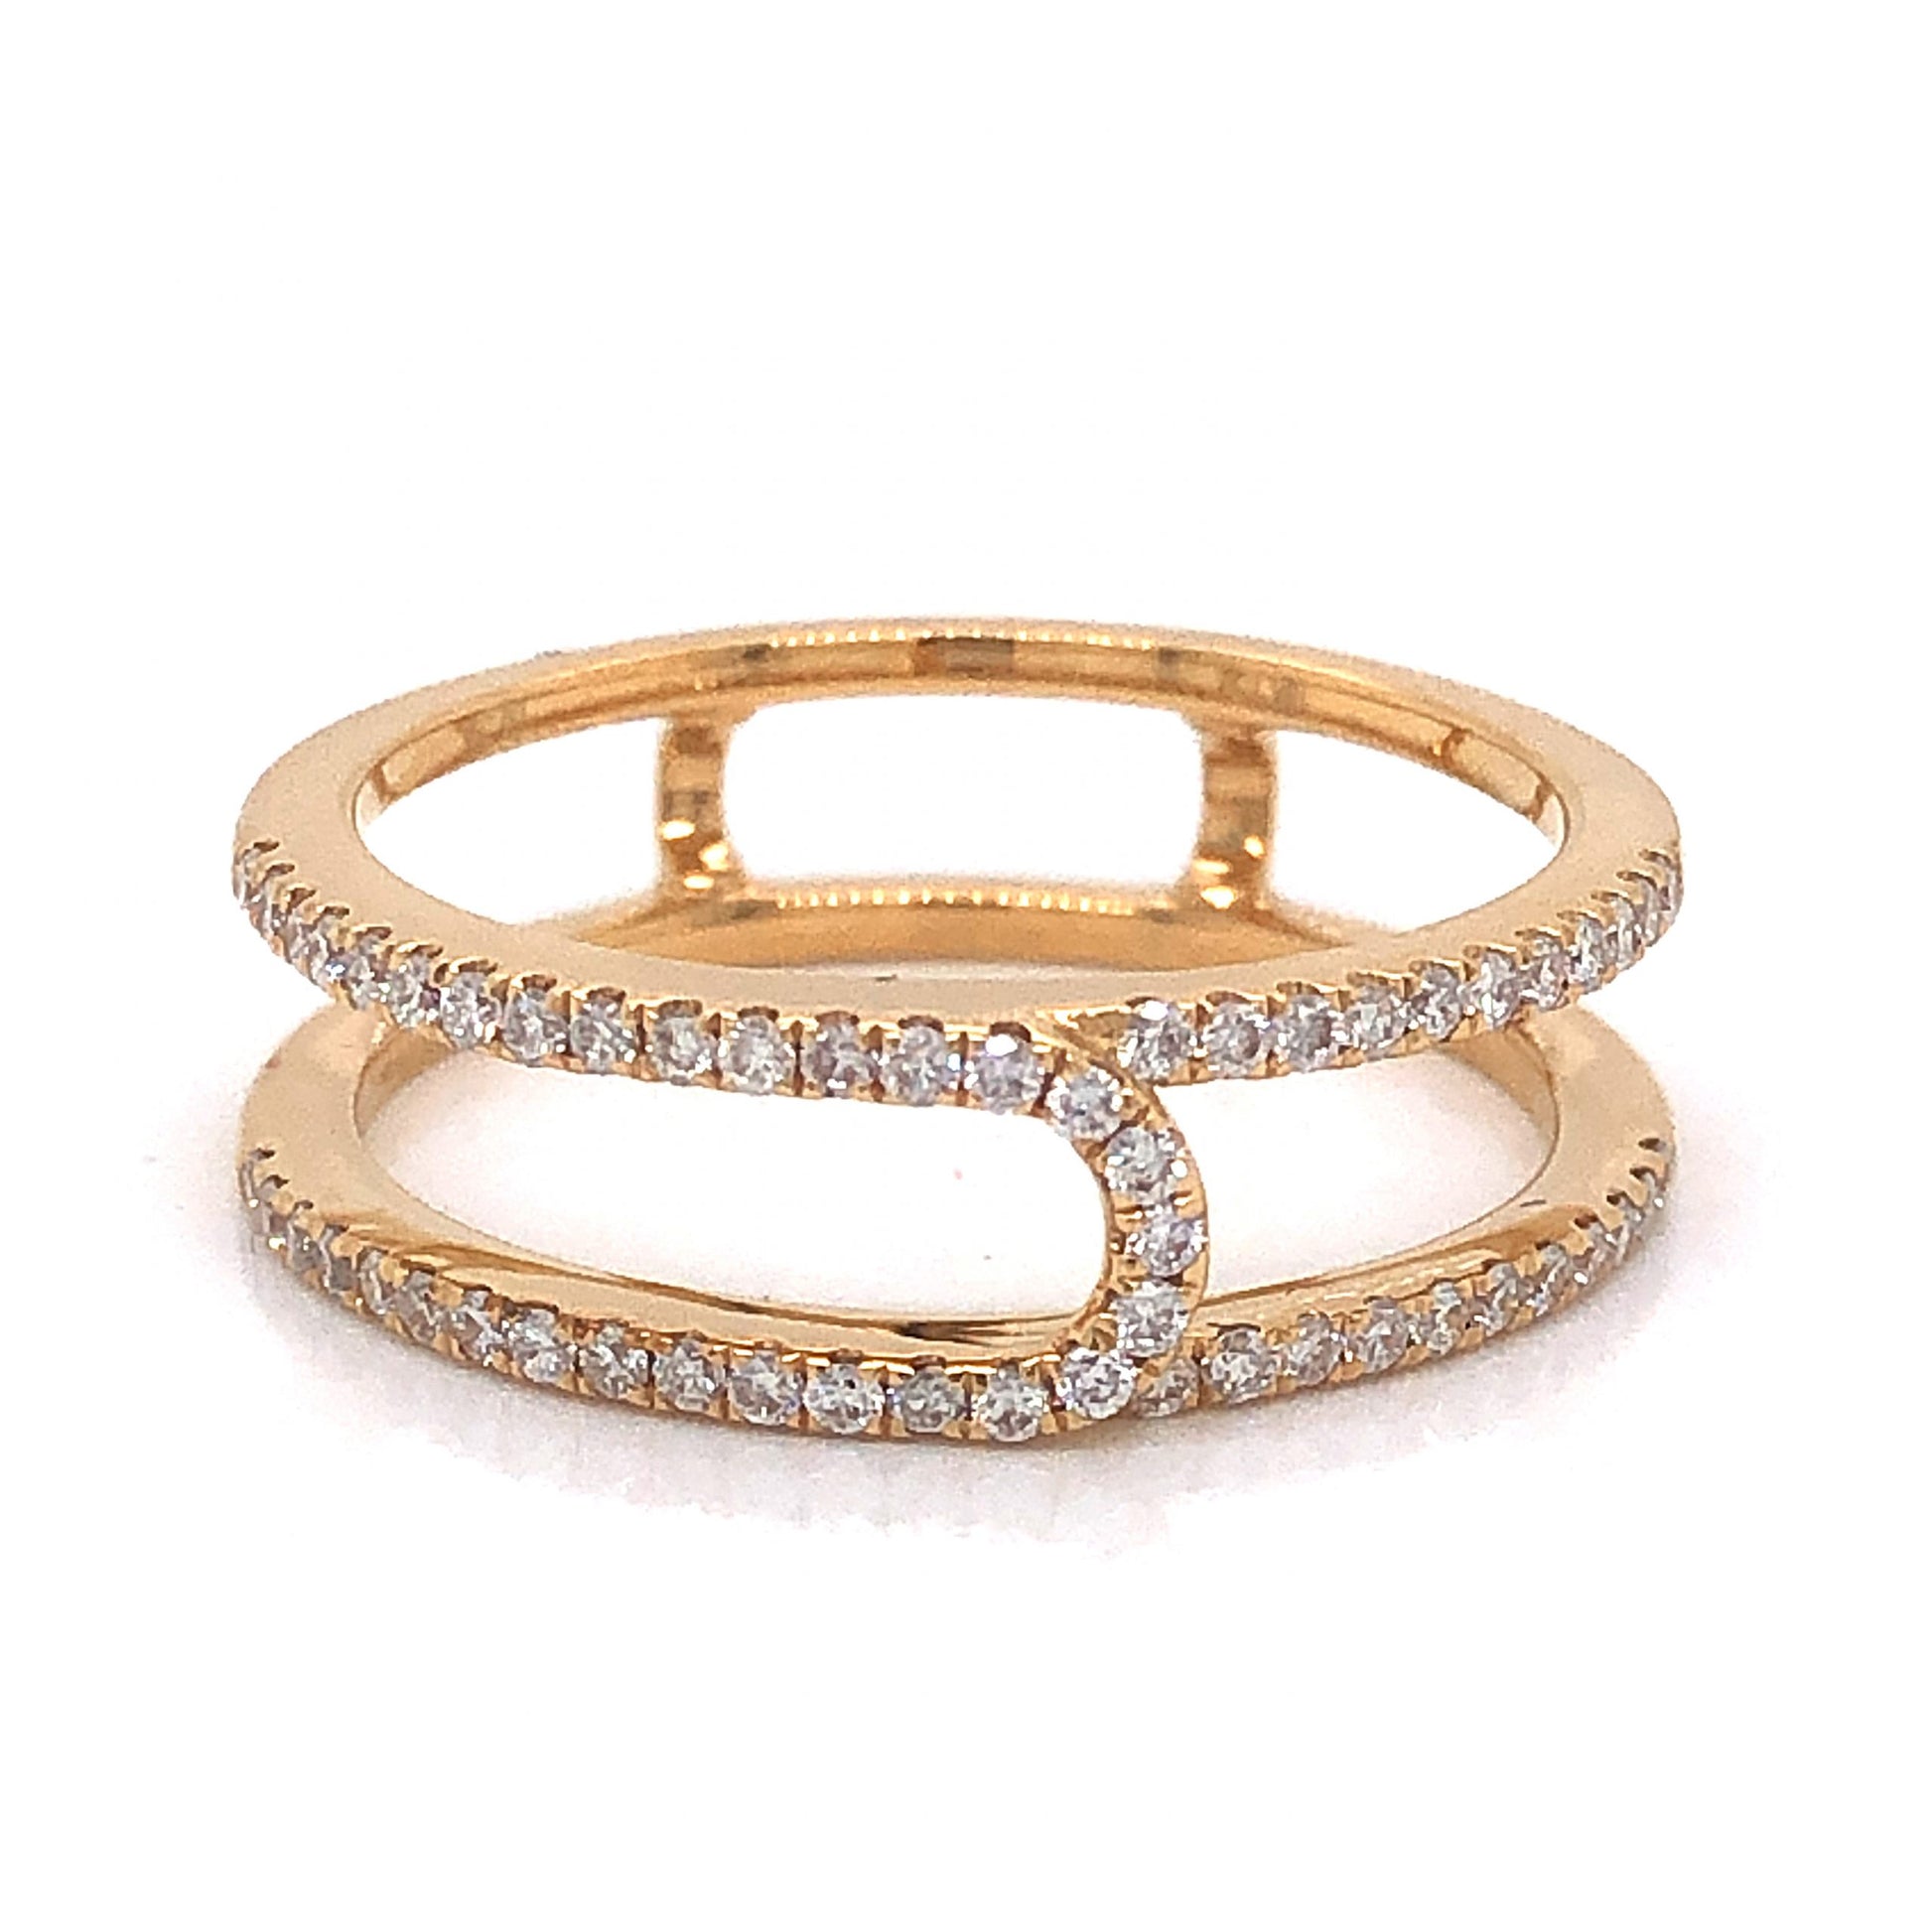 Pave Diamond Double Band Stacking Ring in 18k Yellow GoldComposition: 18 Karat Yellow Gold Ring Size: 7 Total Diamond Weight: .29ct Total Gram Weight: 3.0 g Inscription: 18k 750
      